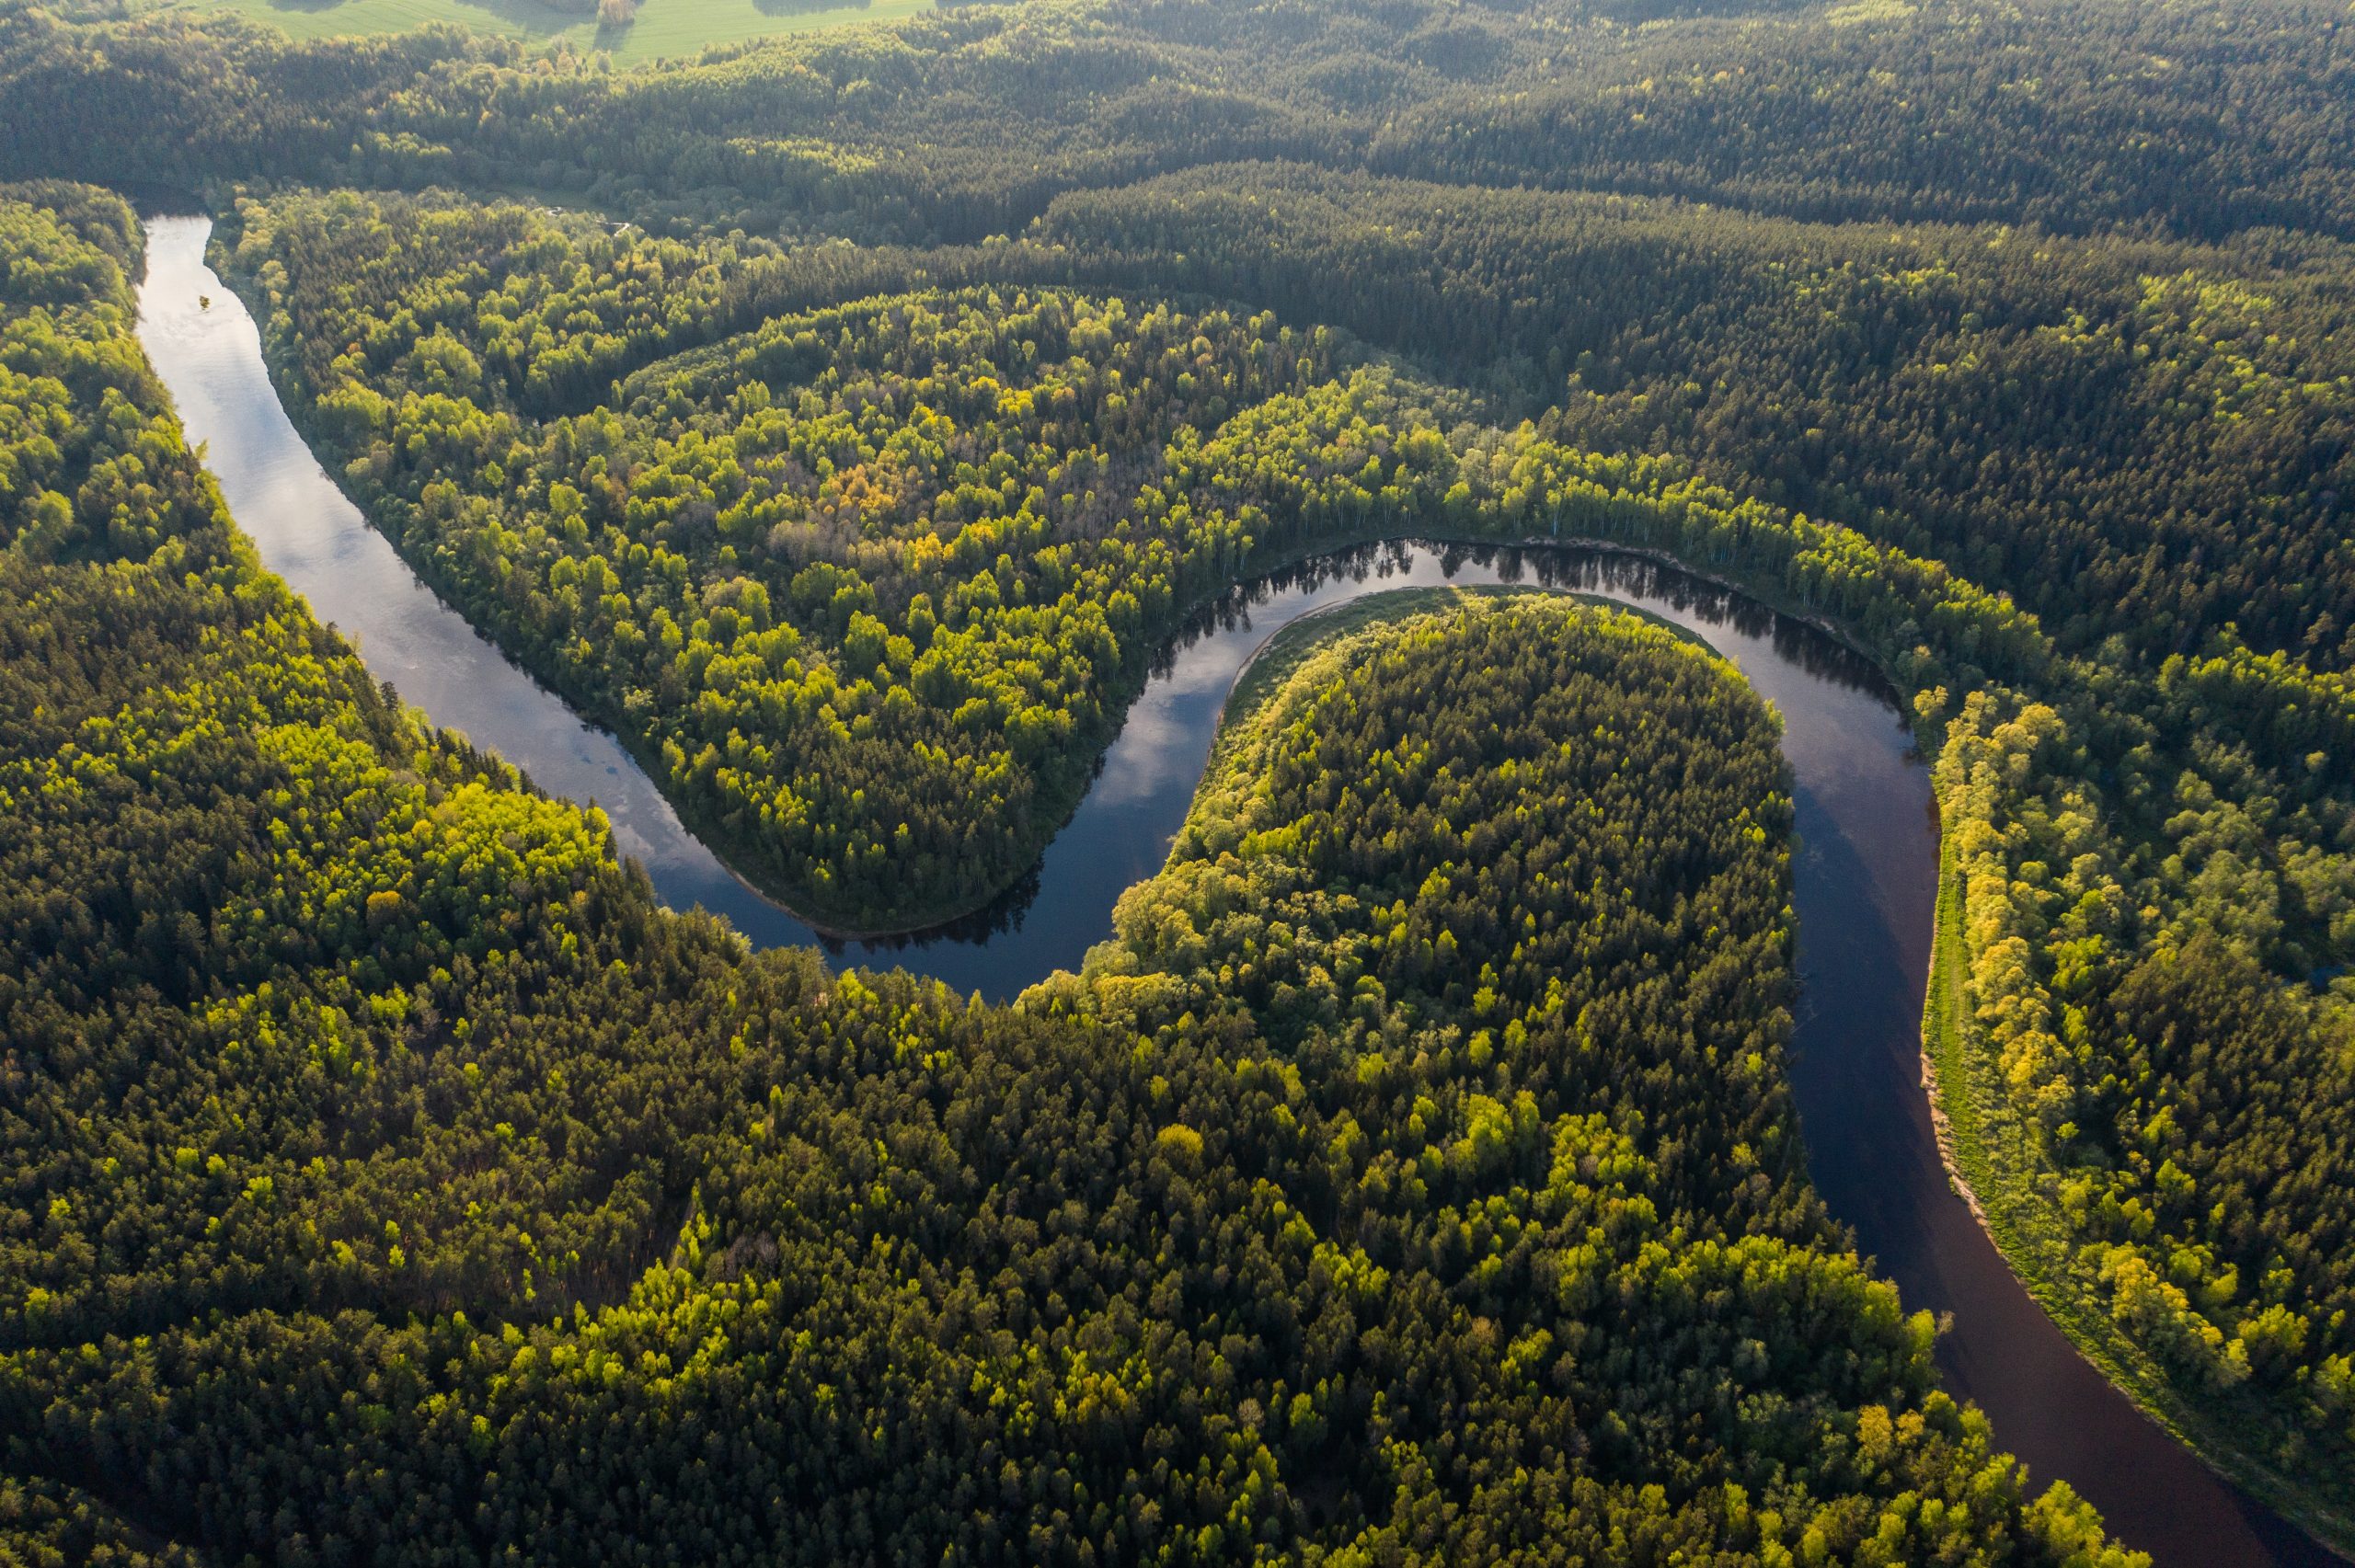 Top view of a section of the Amazon river and forest